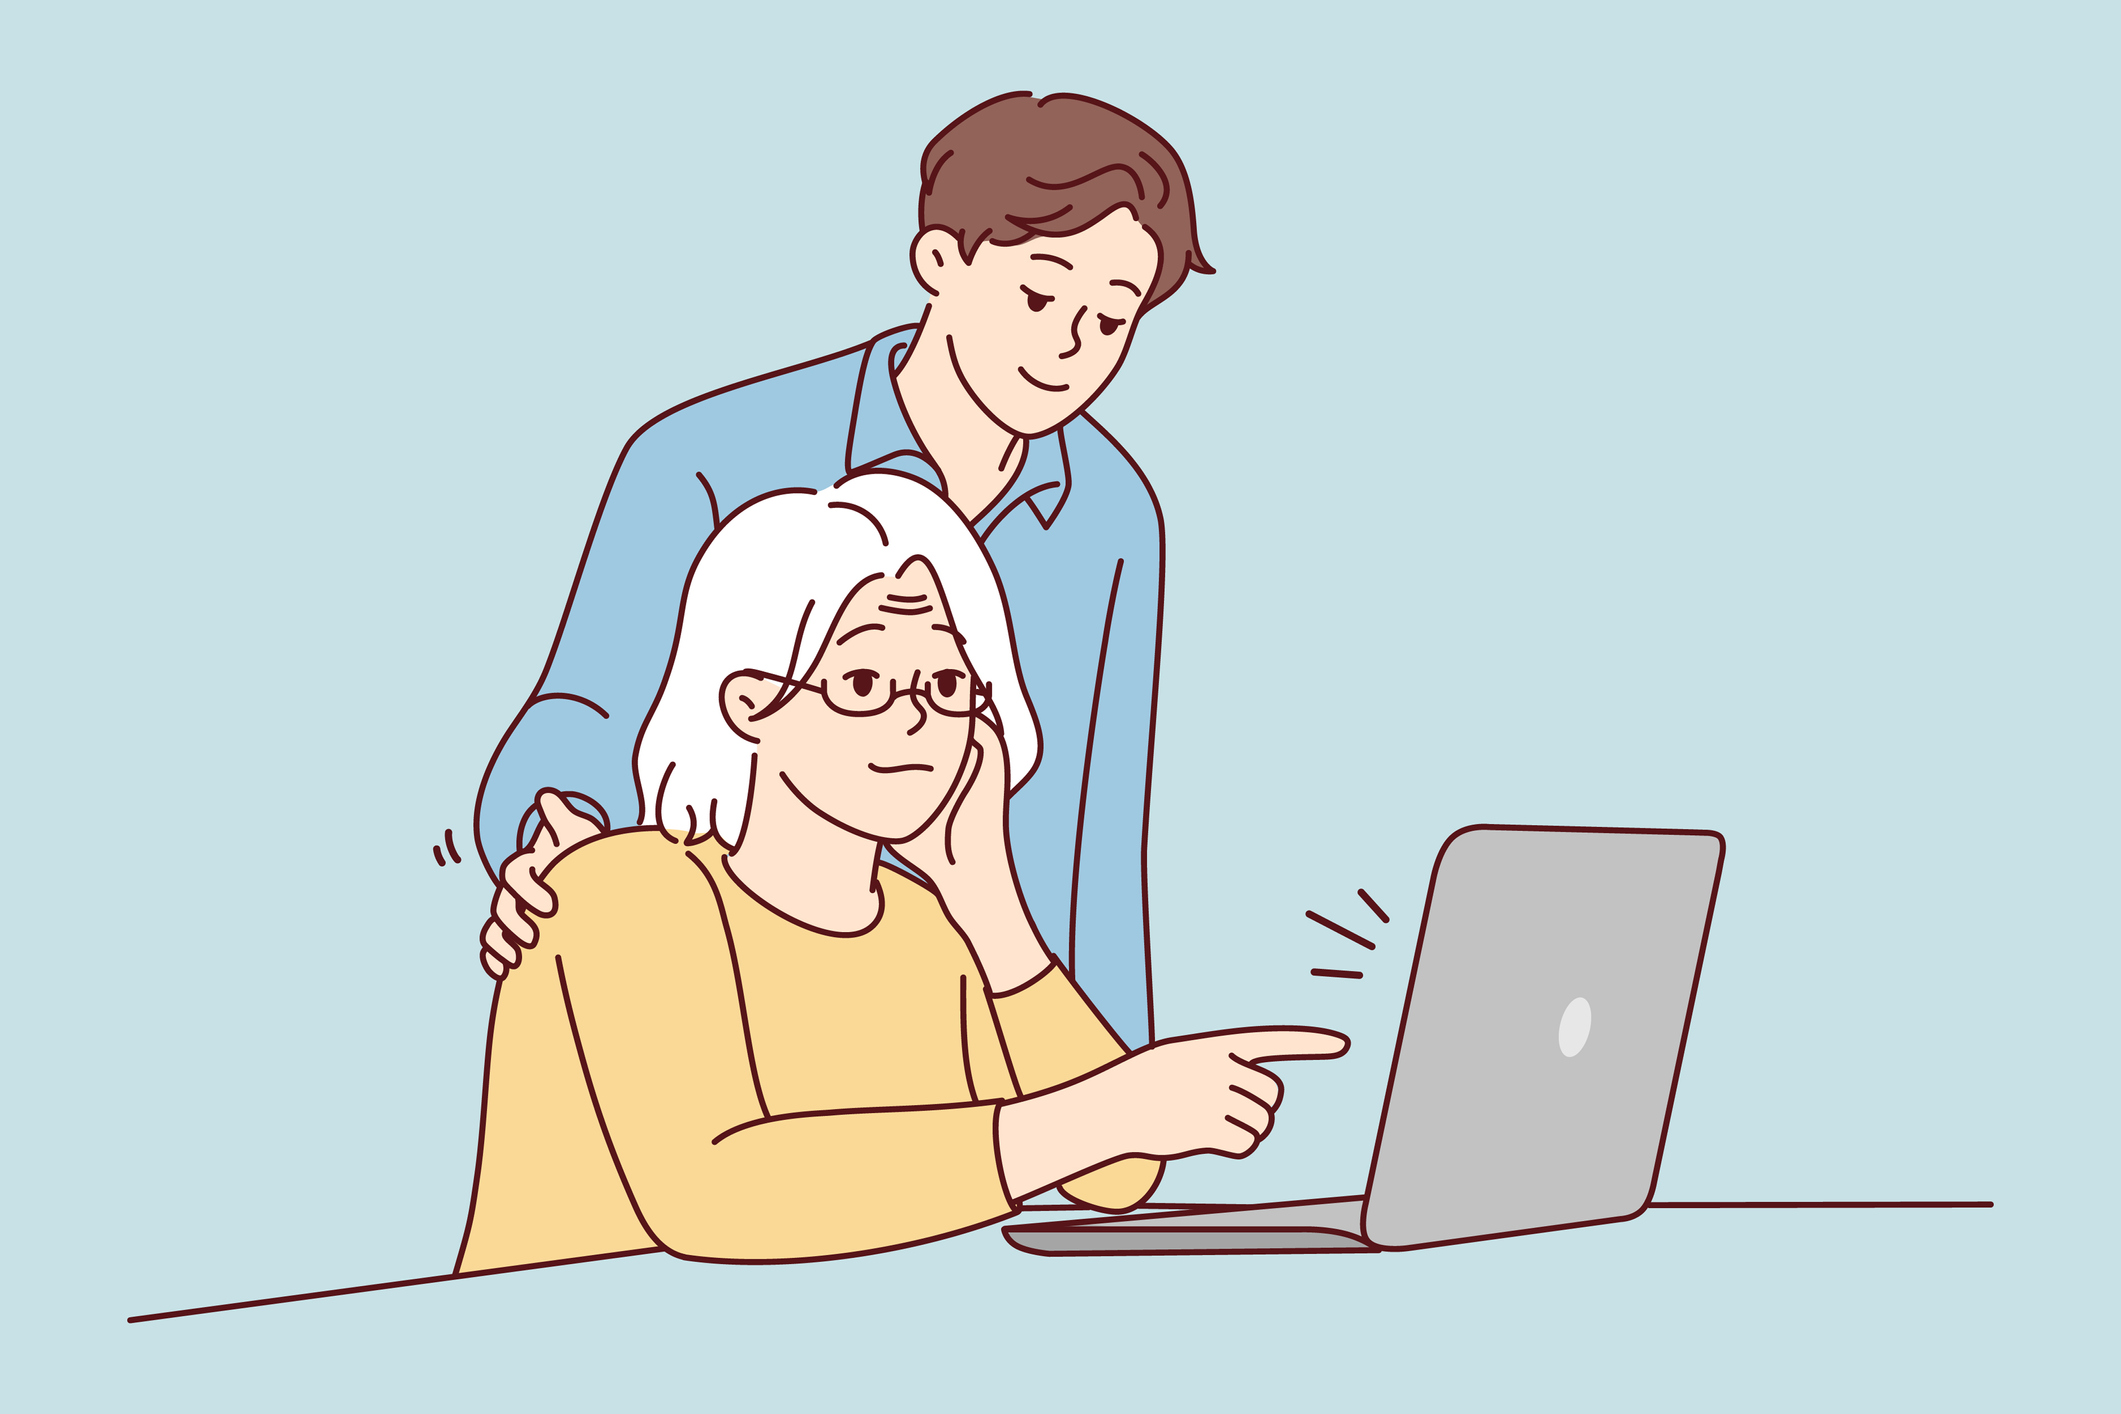 A drawing of a younger man standing over an older woman seated at a table with a laptop computer.